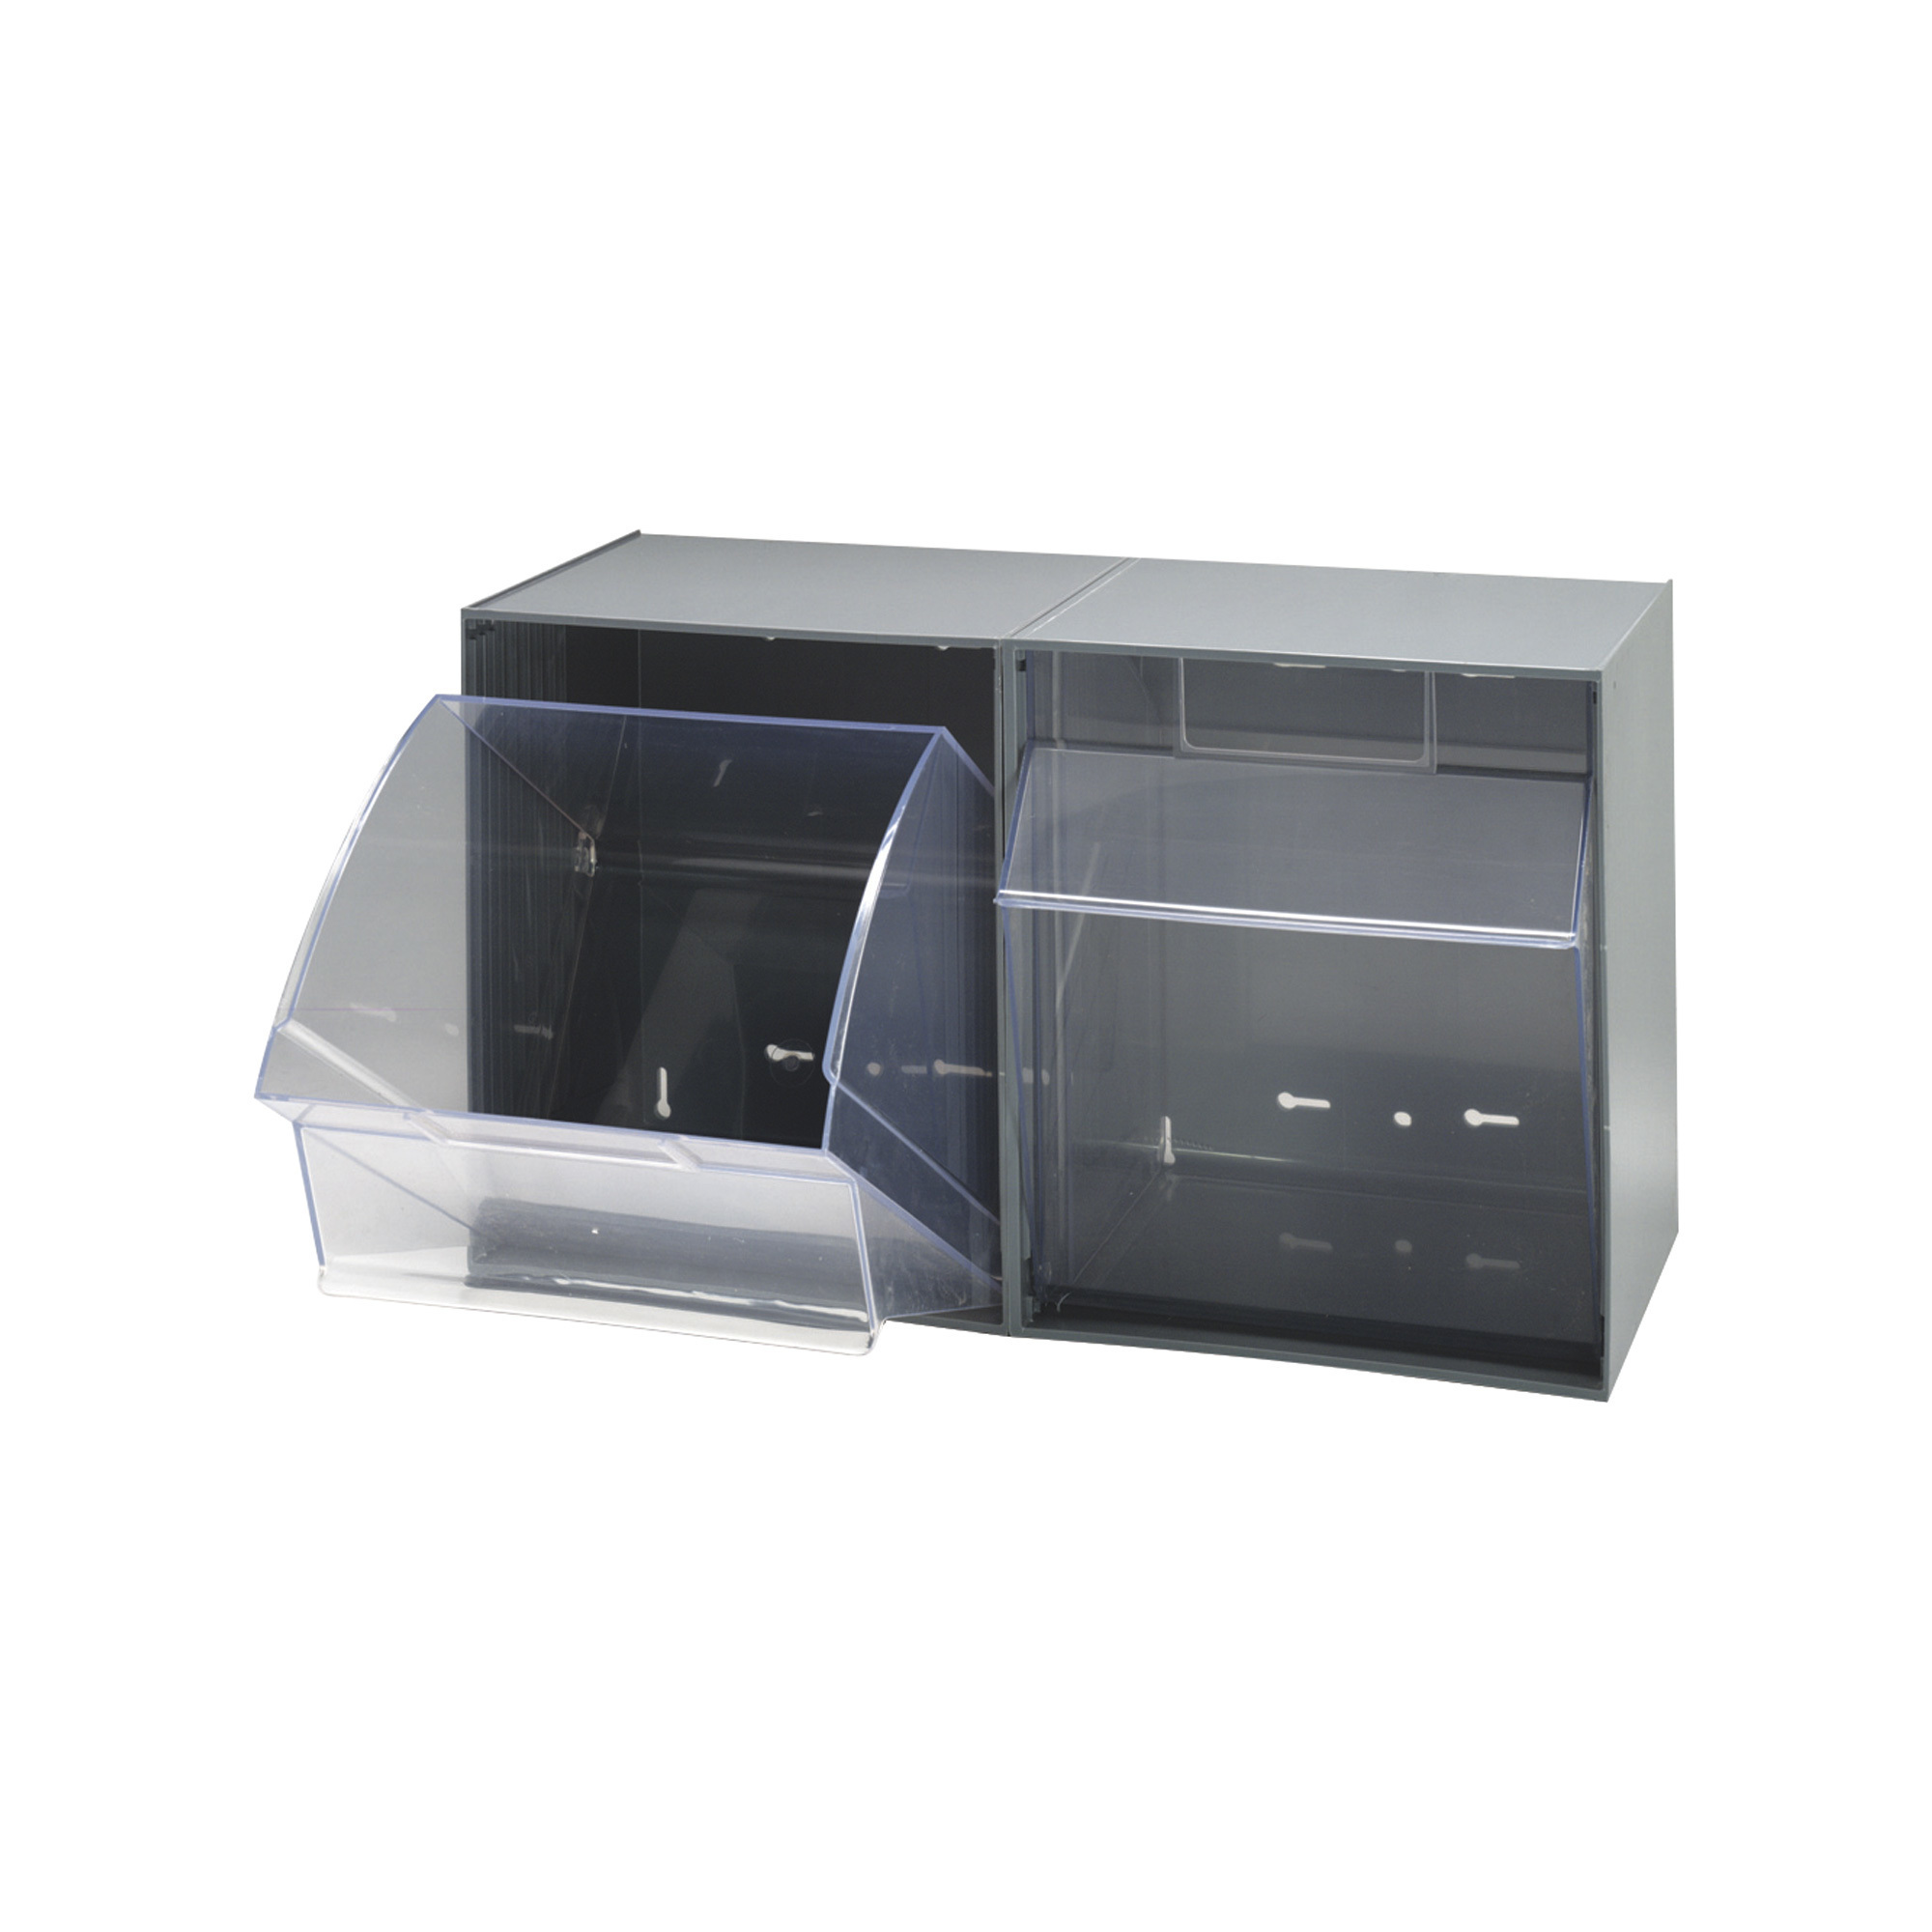 QUANTUM STORAGE SYSTEMS, 11 3/4 in x 23 5/8 in x 13 7/8 in,  Freestanding/Wall, Tip-Out Bin - 1VH67